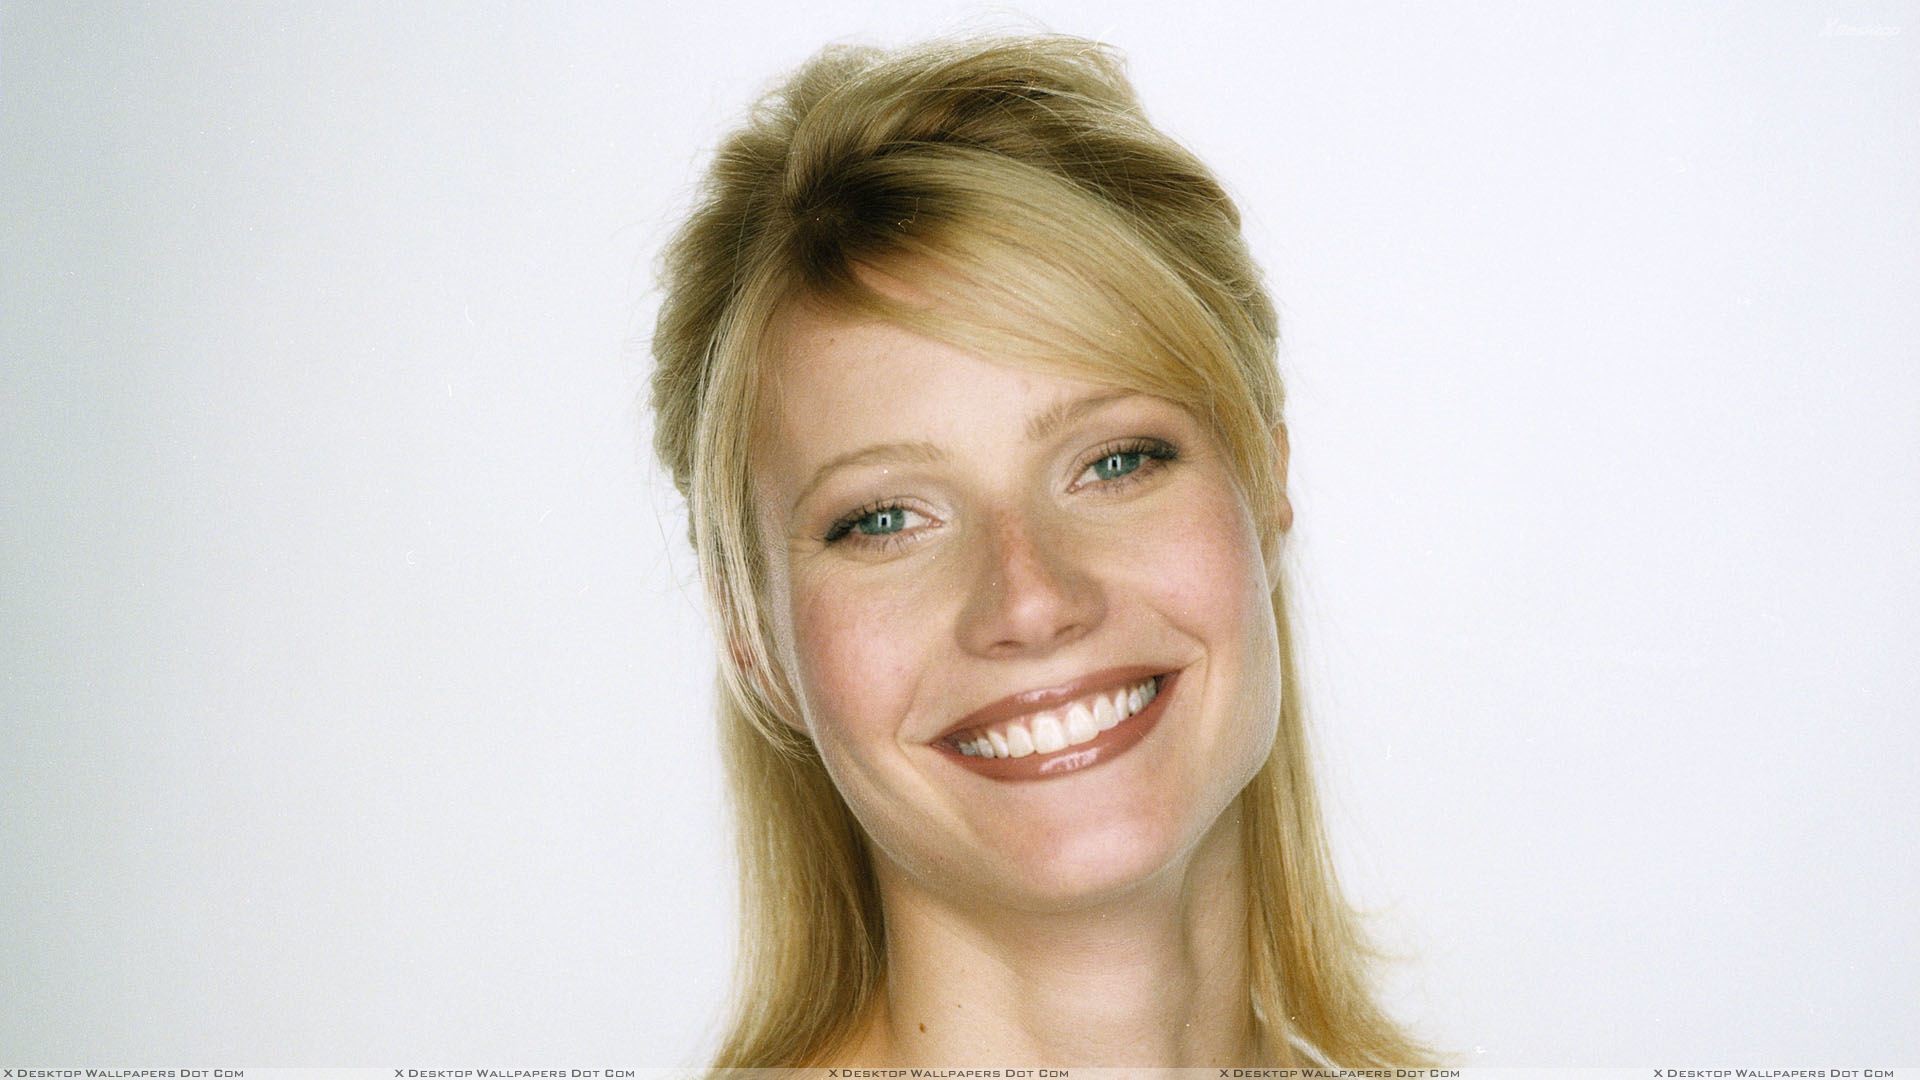 1920x1080 You are viewing wallpaper titled "Gwyneth Paltrow Glossy Lips At Robert  Fleischauer ...